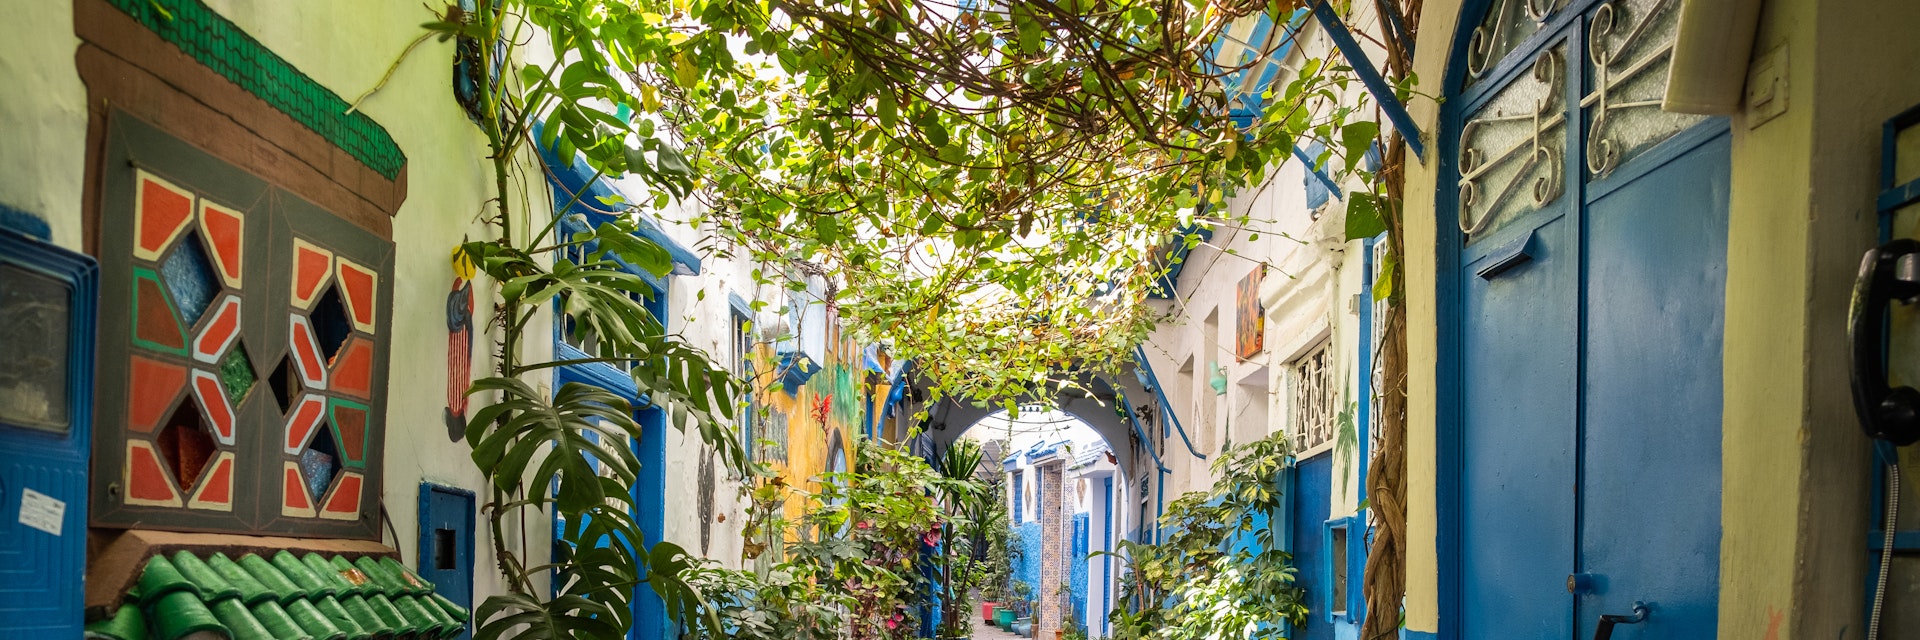 A beautiful and suggestive Tangier kasbah with colored walls and doors and a lot of plant and flowers outdoor.
1412324267